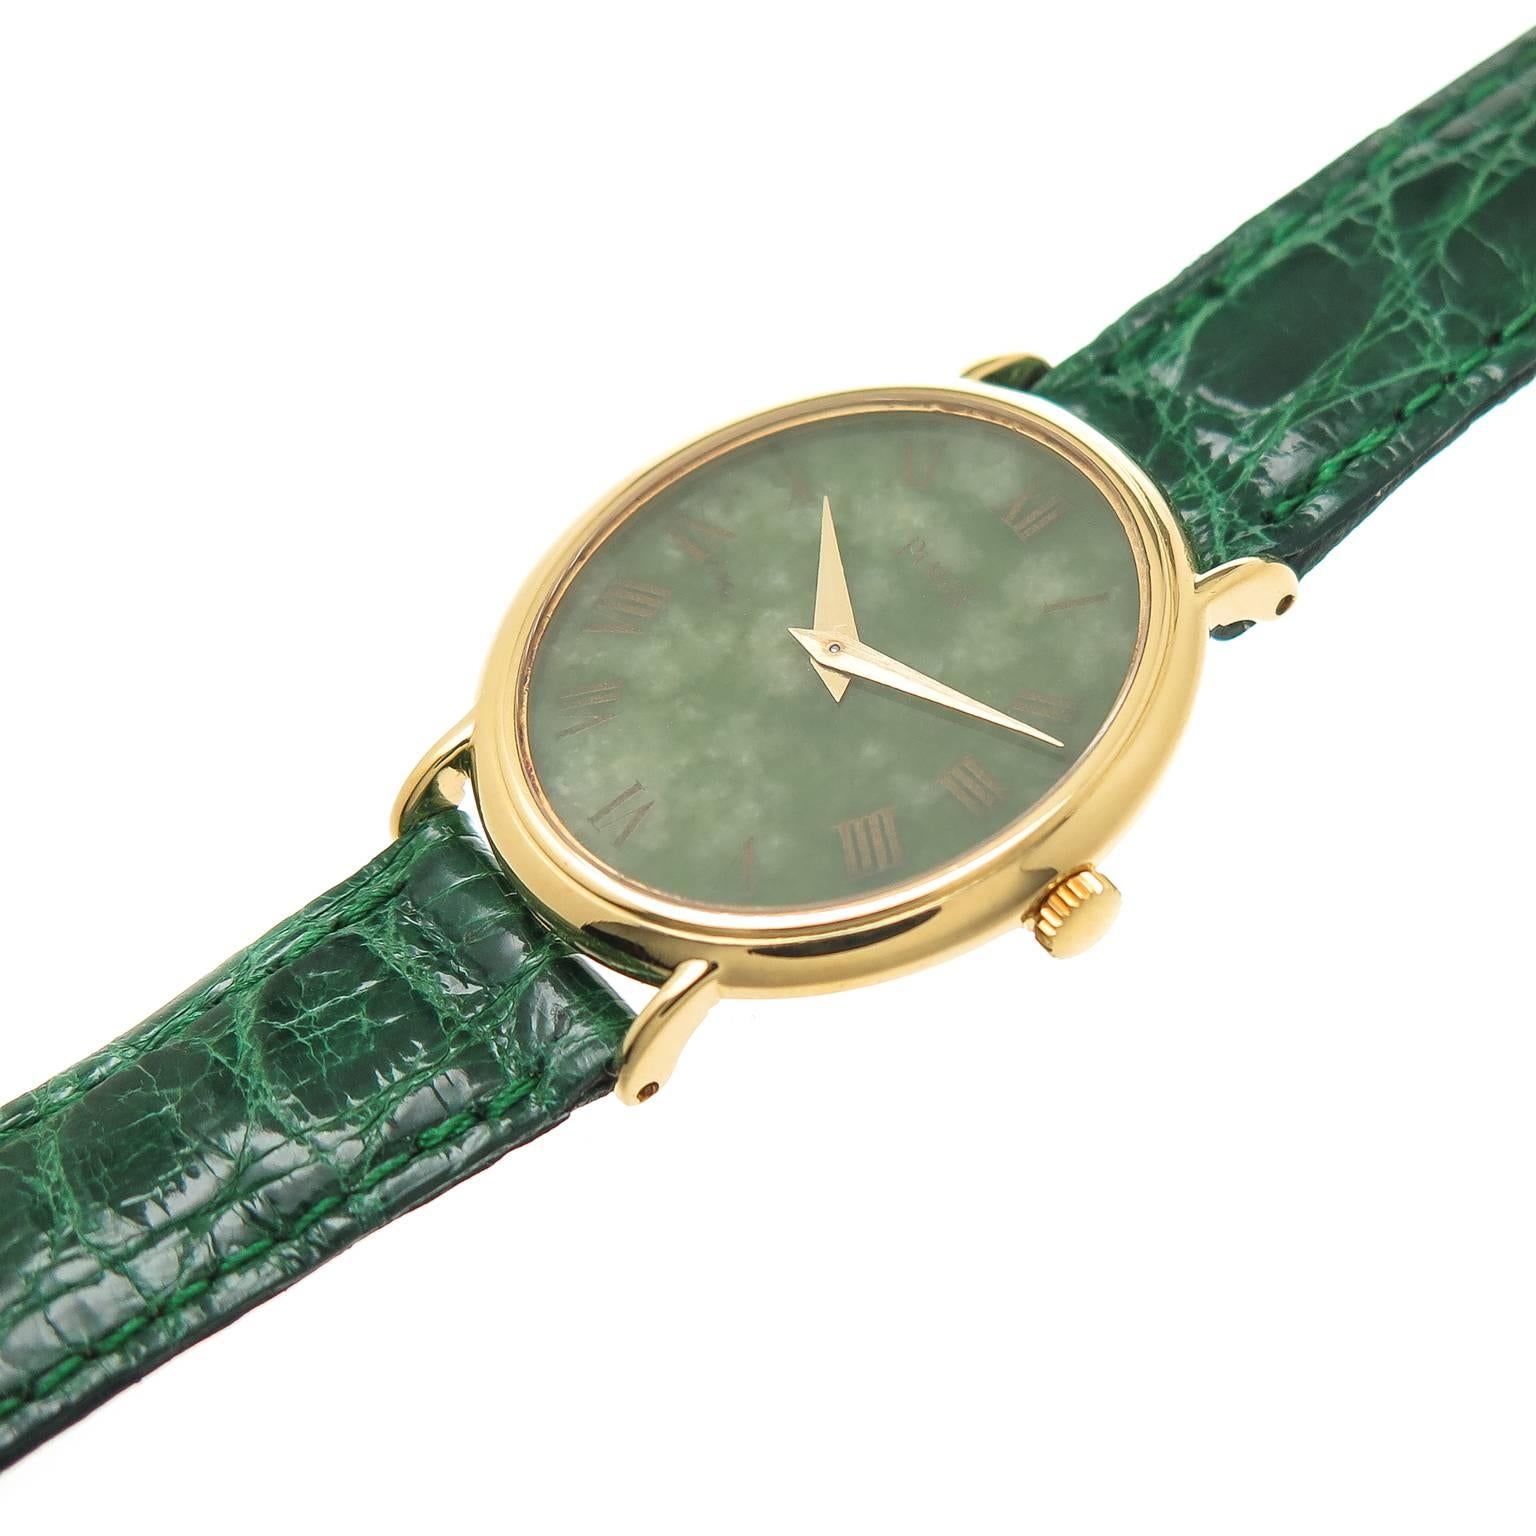 Circa 1980s Piaget Ladies Watch, 18K yellow Gold 30 X 24 MM Oval case. Green Nephrite Dial with Gold Roman Numerals, Mechanical, manual winding movement. New Debeers Green Crocodile Padded Strap. recently serviced and comes with a one year N. Green